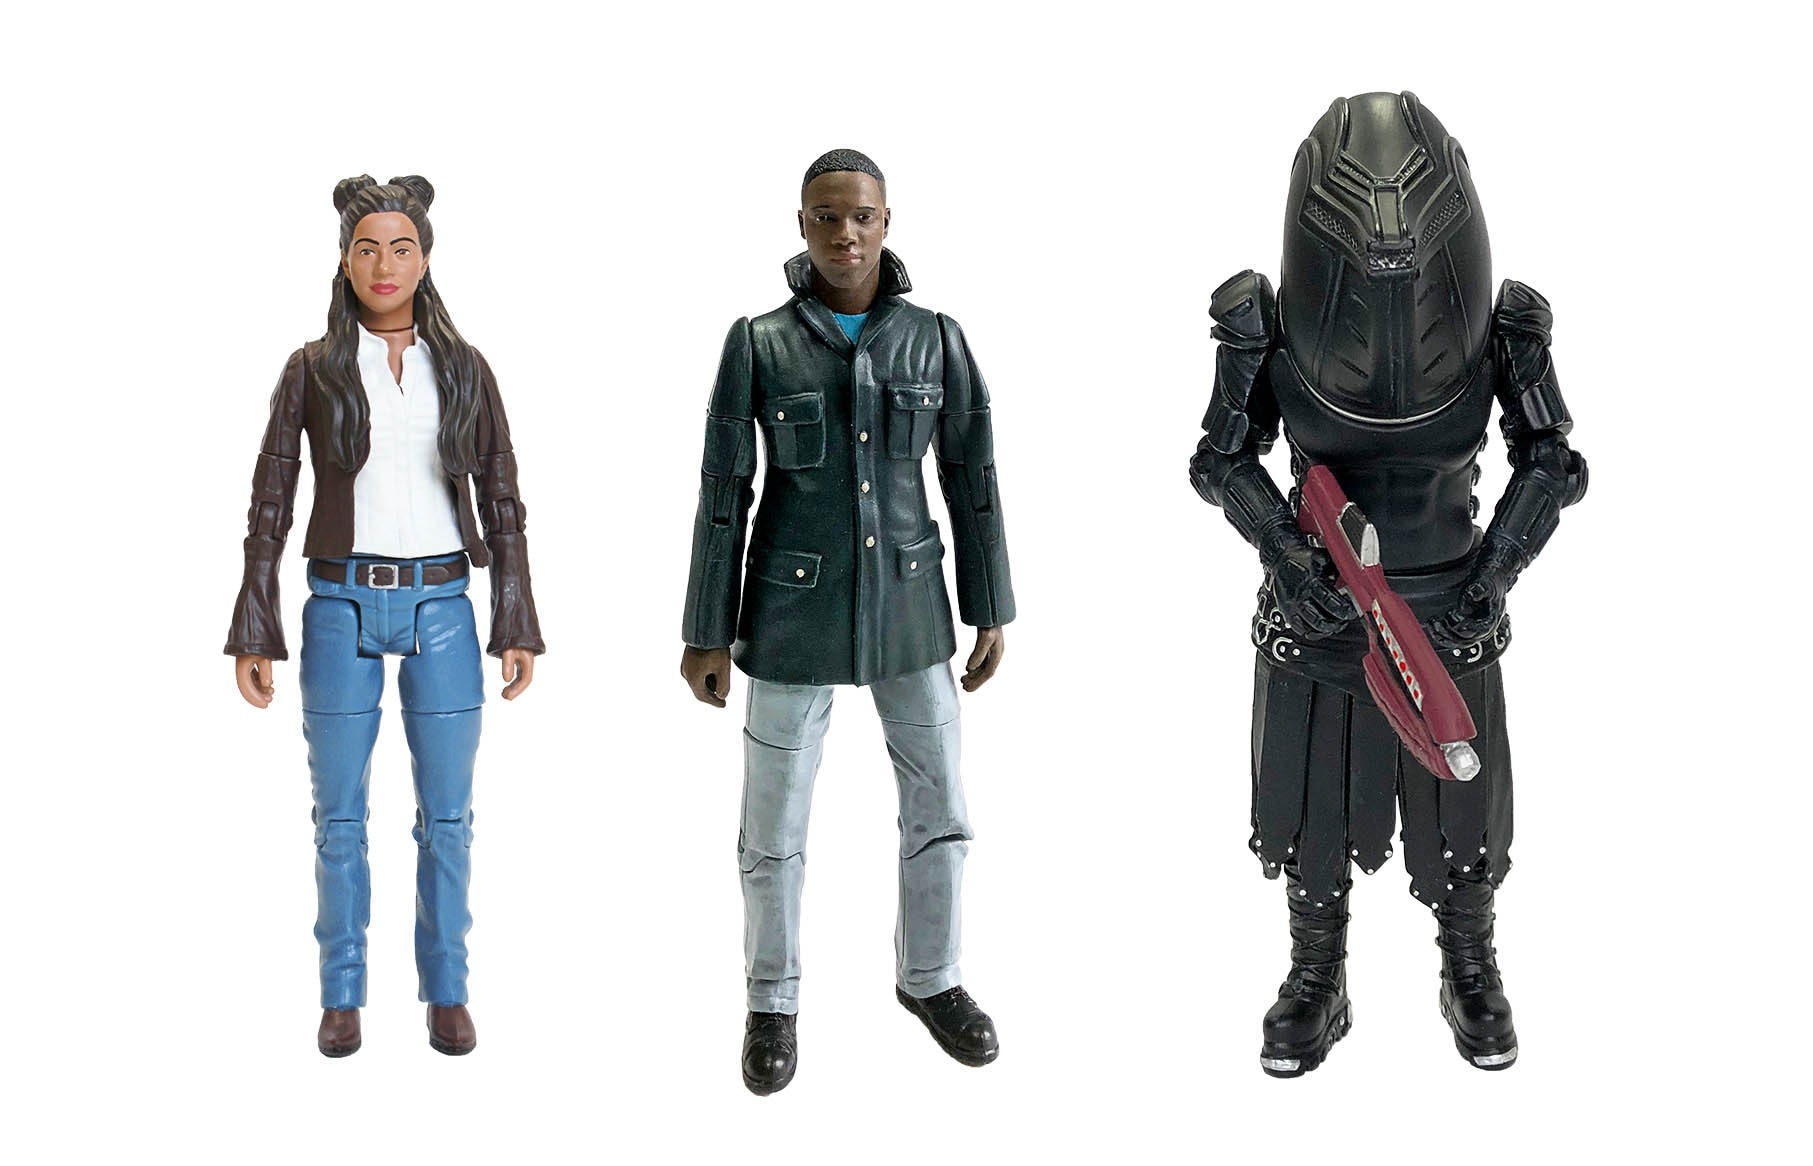 Doctor Who Sarah Jane Smith Figure Companions Of The 4th Dr Who Unit Set Toy 